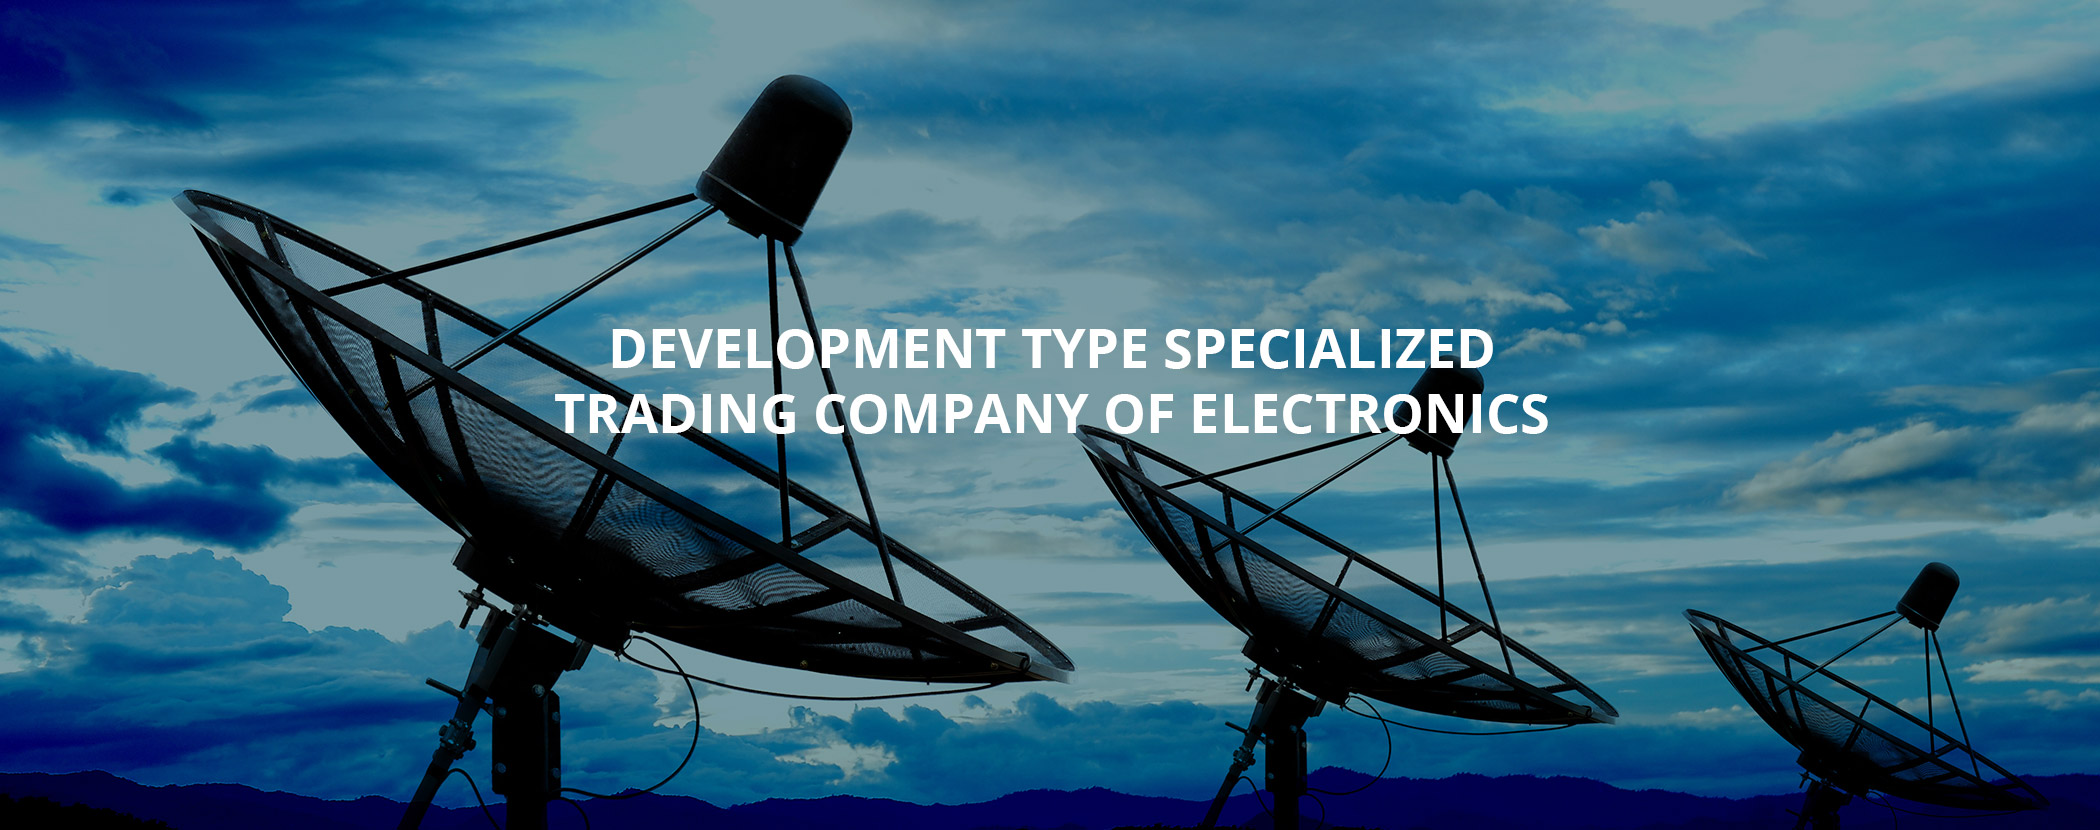 Development type specialized
trading company of electronics